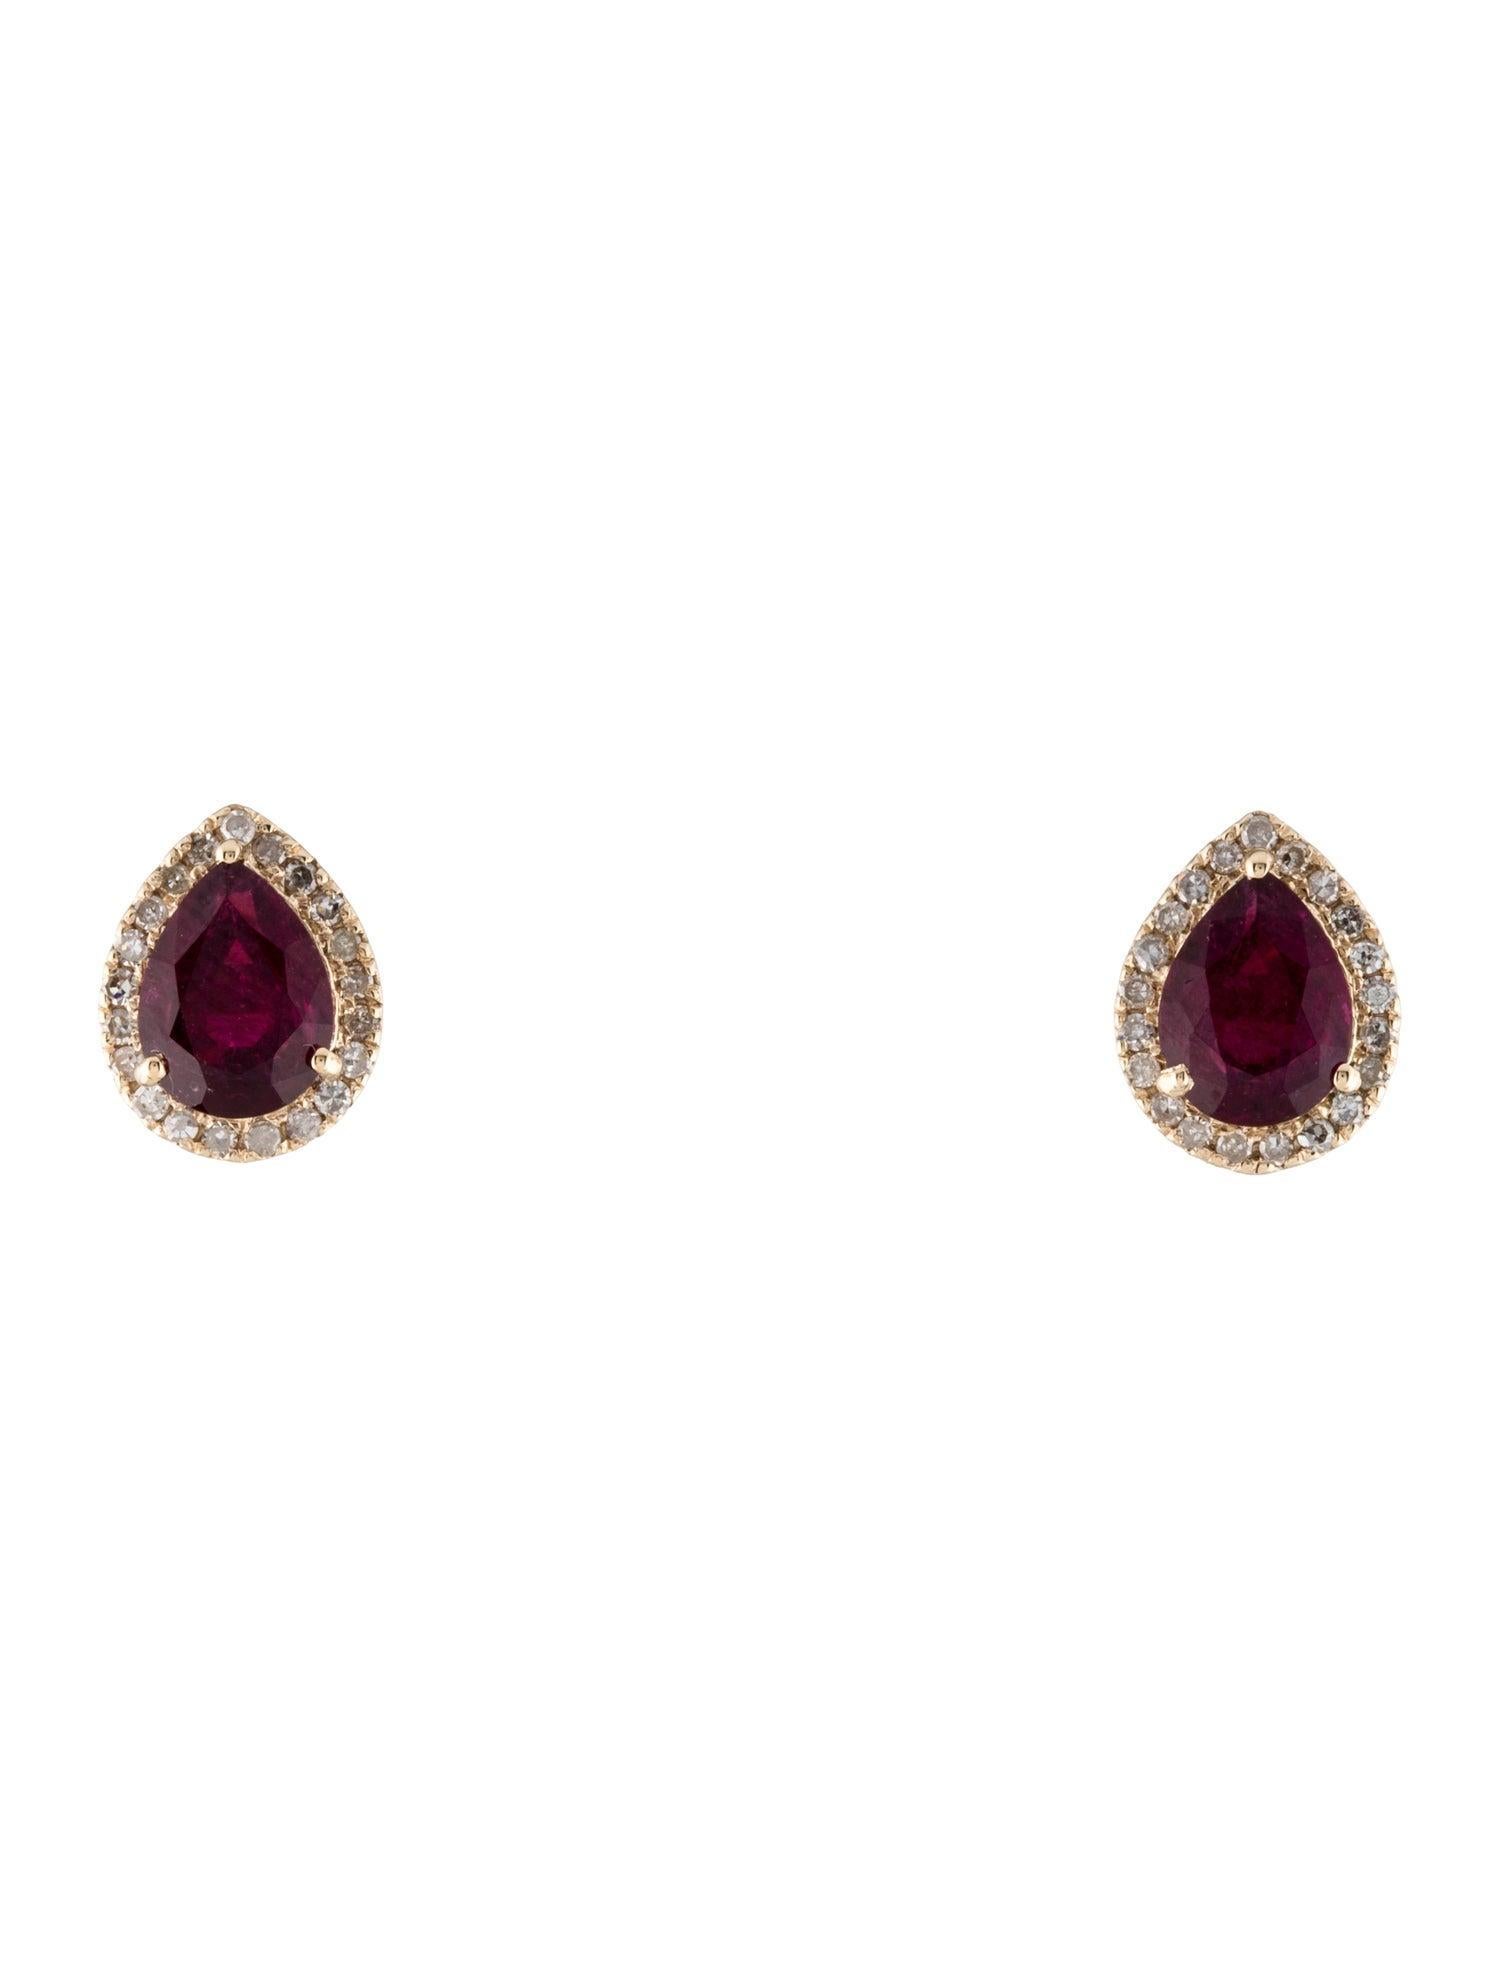 Elevate your elegance with these stunning 14K Yellow Gold Stud Earrings, featuring the vibrant allure of 2.25 carats of faceted pear-shaped Tourmaline in enchanting shades of red and pink. Complemented by forty-two near colorless, single-cut